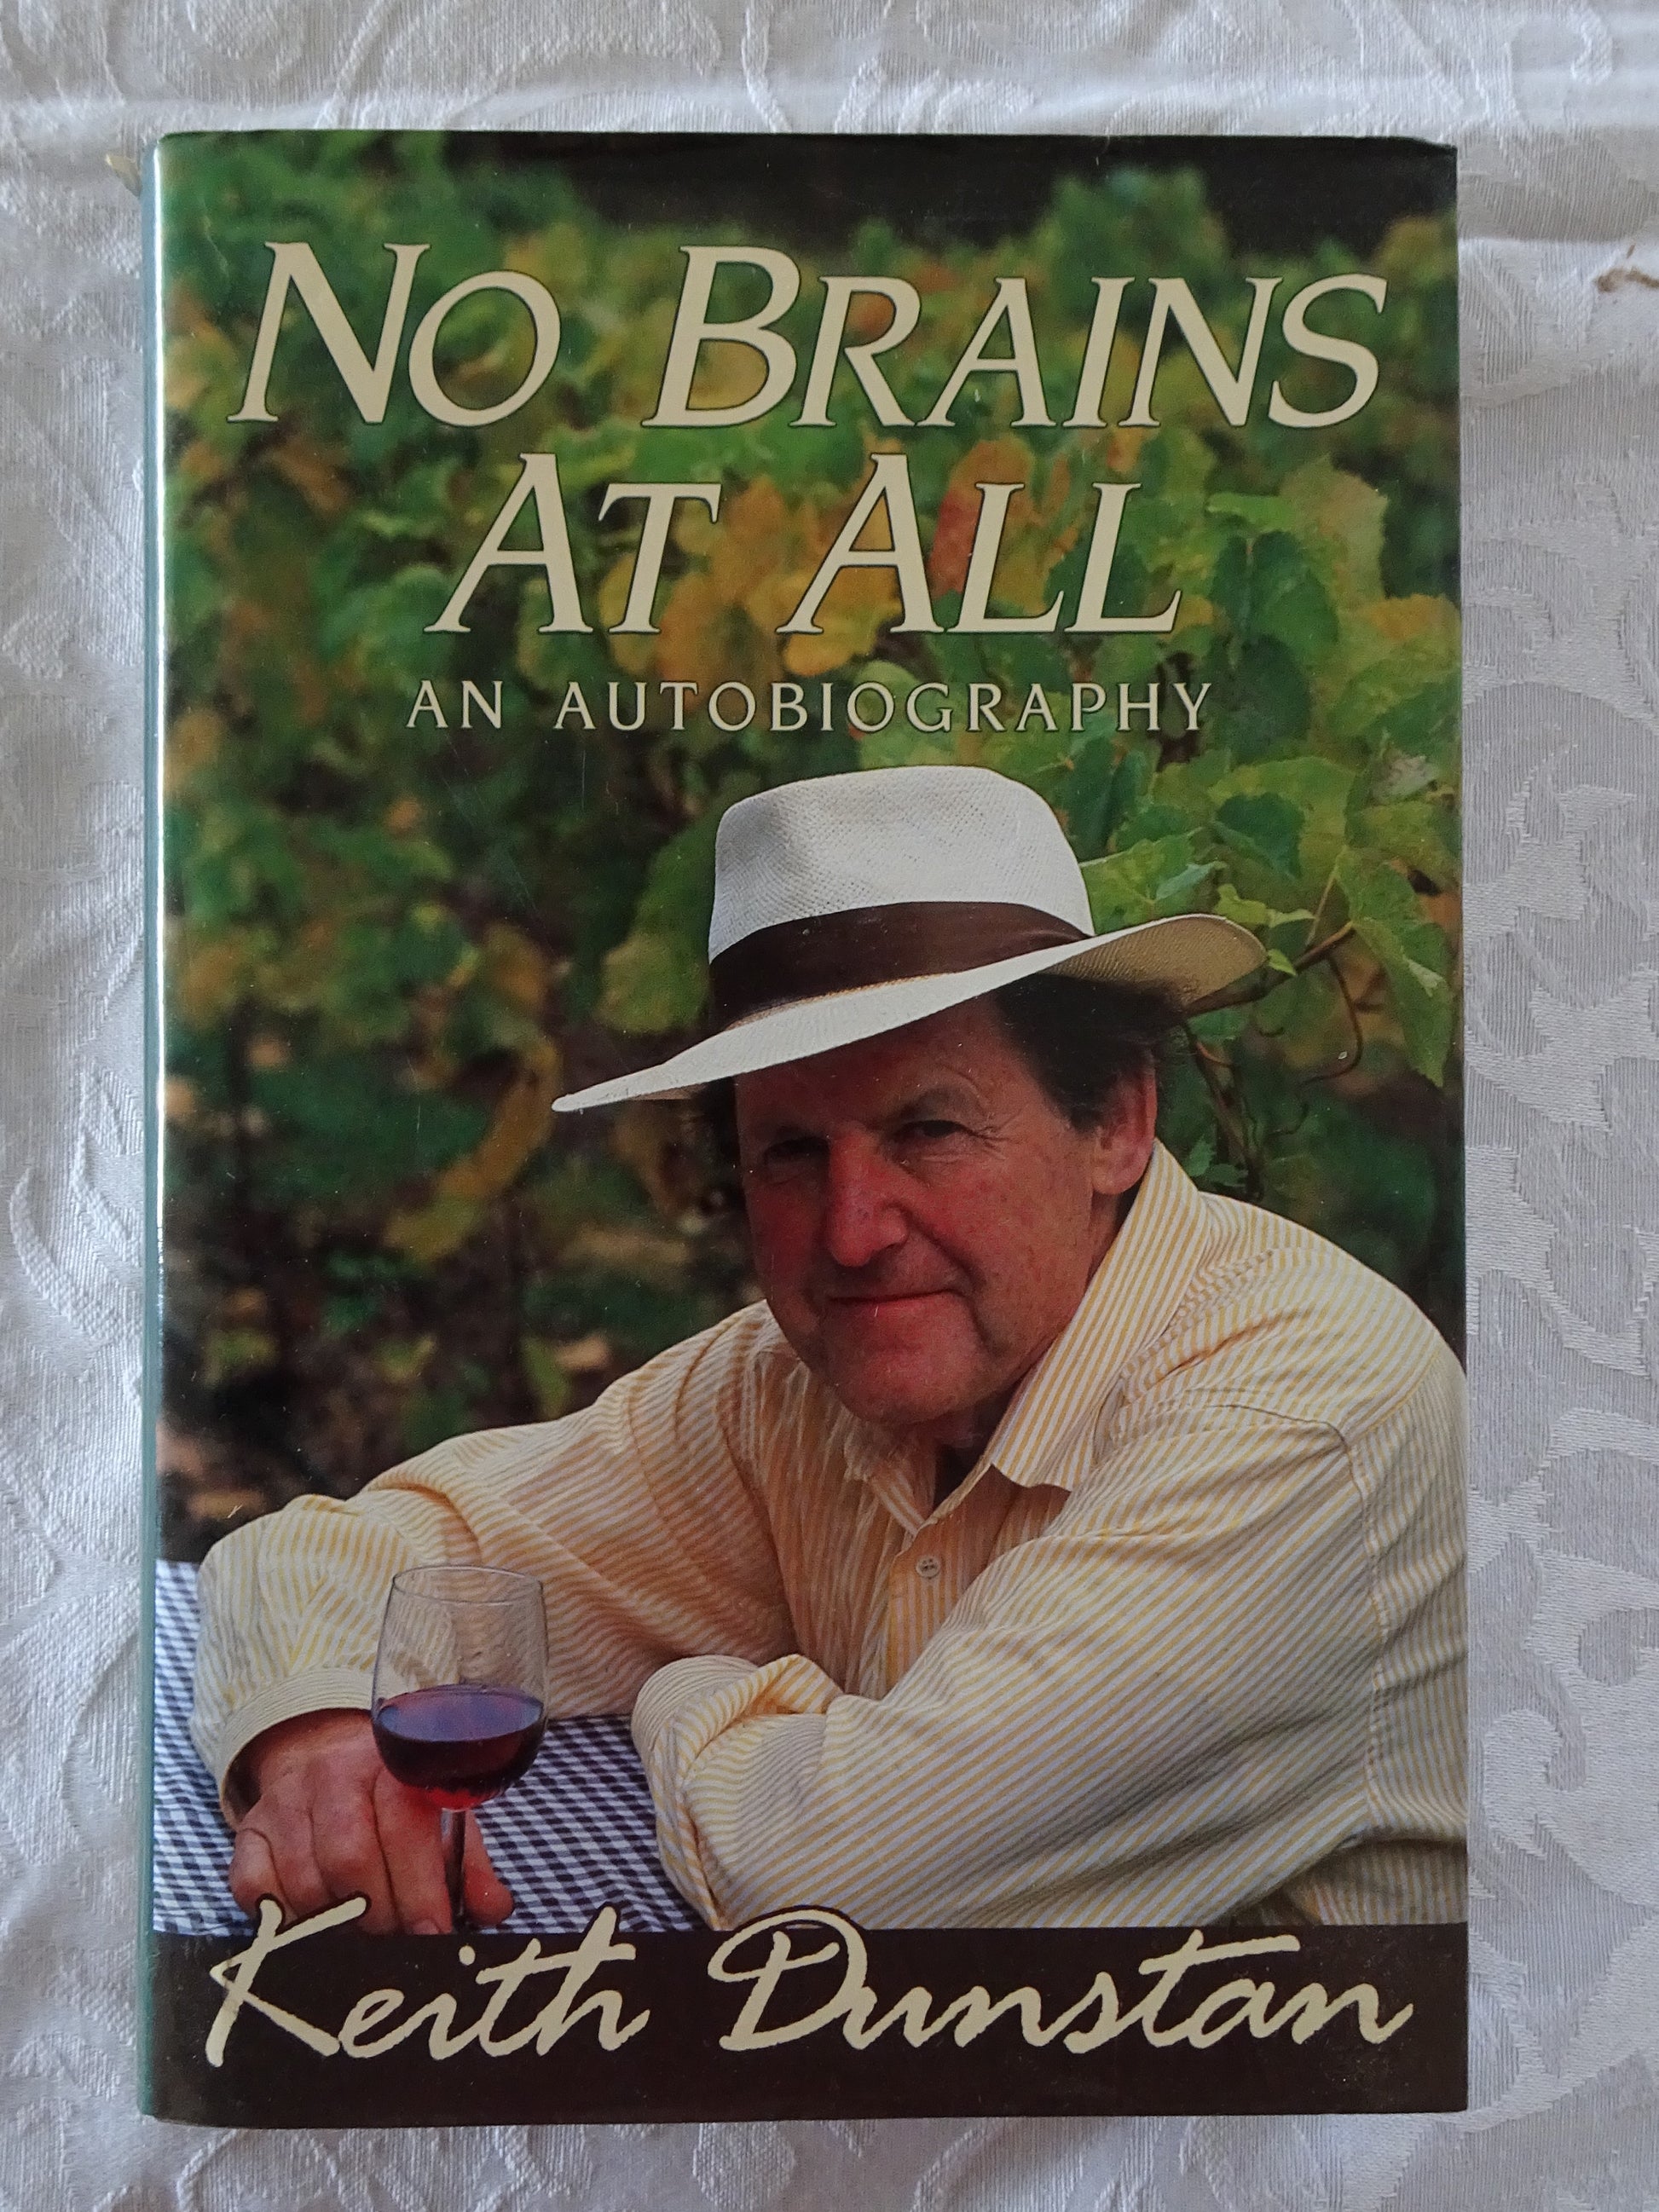 No Brains At All  An Autobiography  by Keith Dunstan